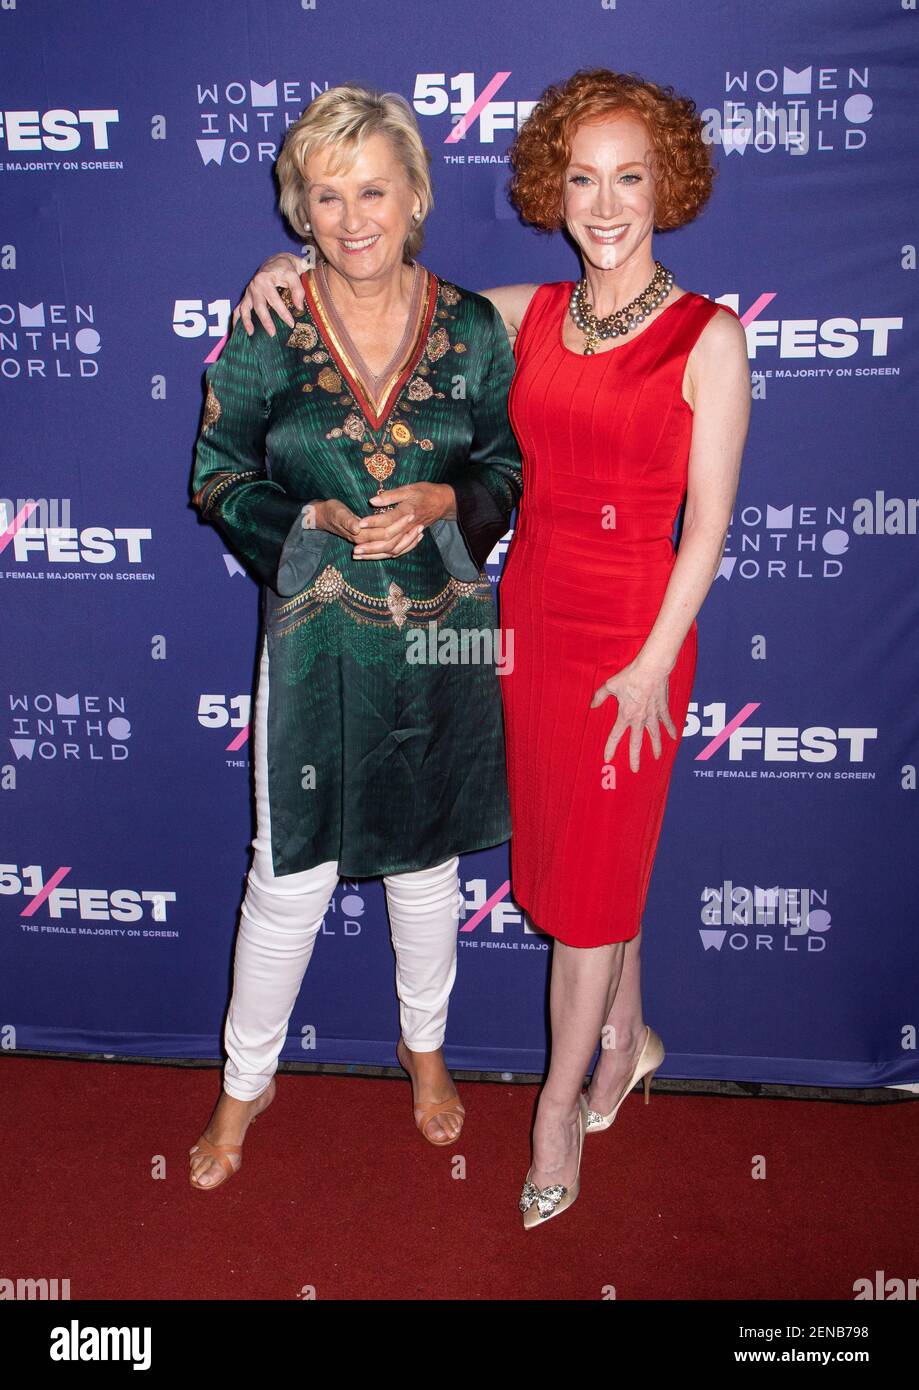 Tina Brown, CEO & Founder of Tina Brown Live Media/ Women in the World, and Kathy Griffin attends the 'Kathy Griffin: A Hell Of A Story' New York premiere during opening night of 51Fest at SVA Theater in New York City, NY, on June 18, 2019. (Photo by Arturo Holmes/Sipa USA) Stock Photo